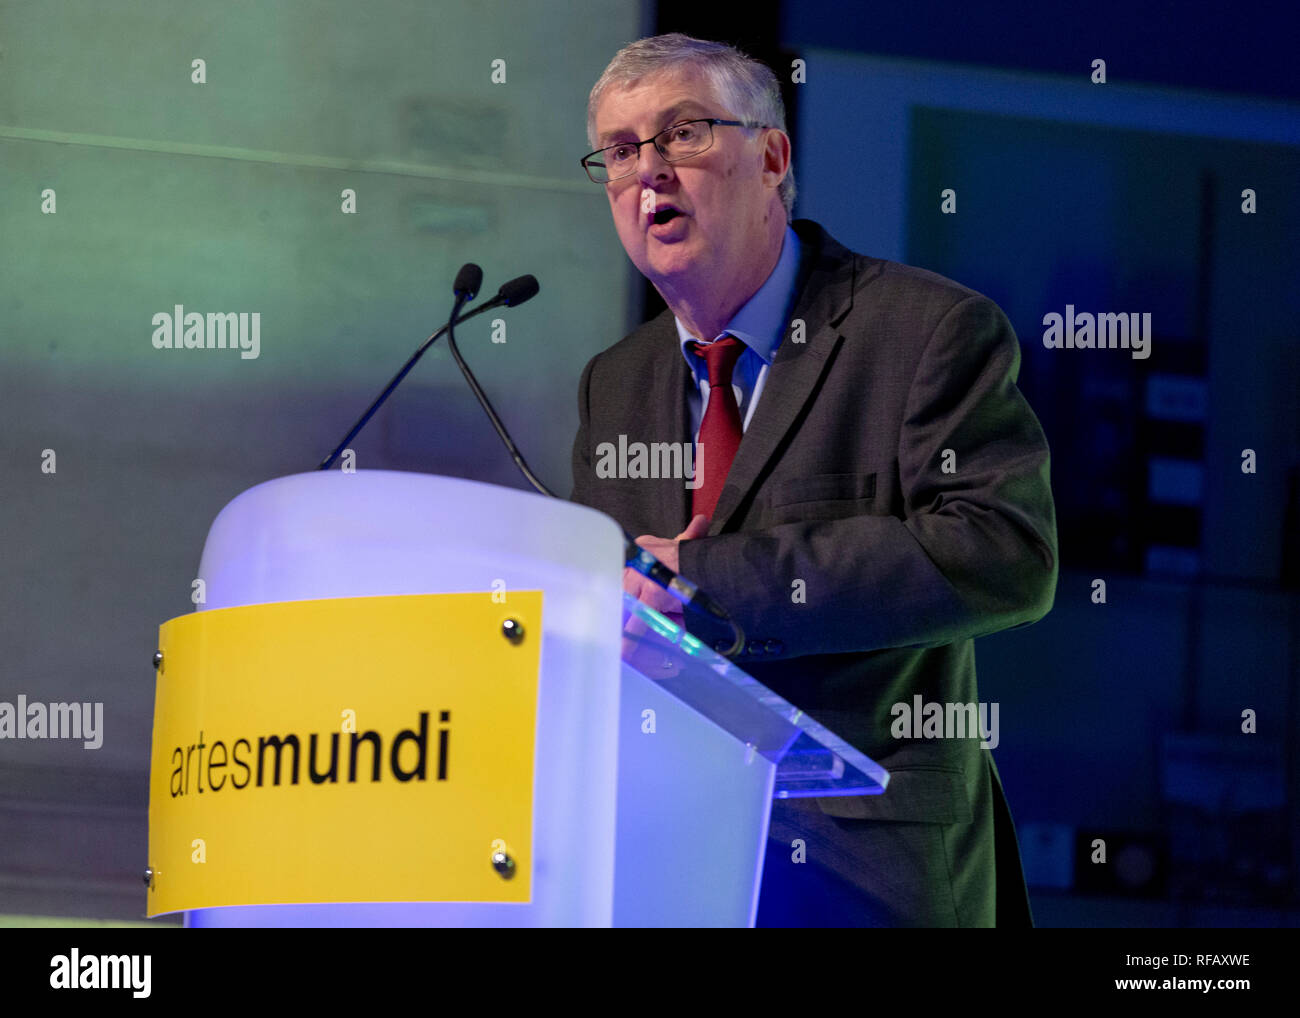 CARDIFF, UK. Mark Drakeford speaking at the 8th Artes Mundi Awards Ceremony, an internationally-focused organisation and the UK's largest contemporary art prize and exhibition, taking place every 2 years at National Museum Cardiff. Credit: Matthew Lofthouse/Alamy Live News. 24/01/2019. Stock Photo